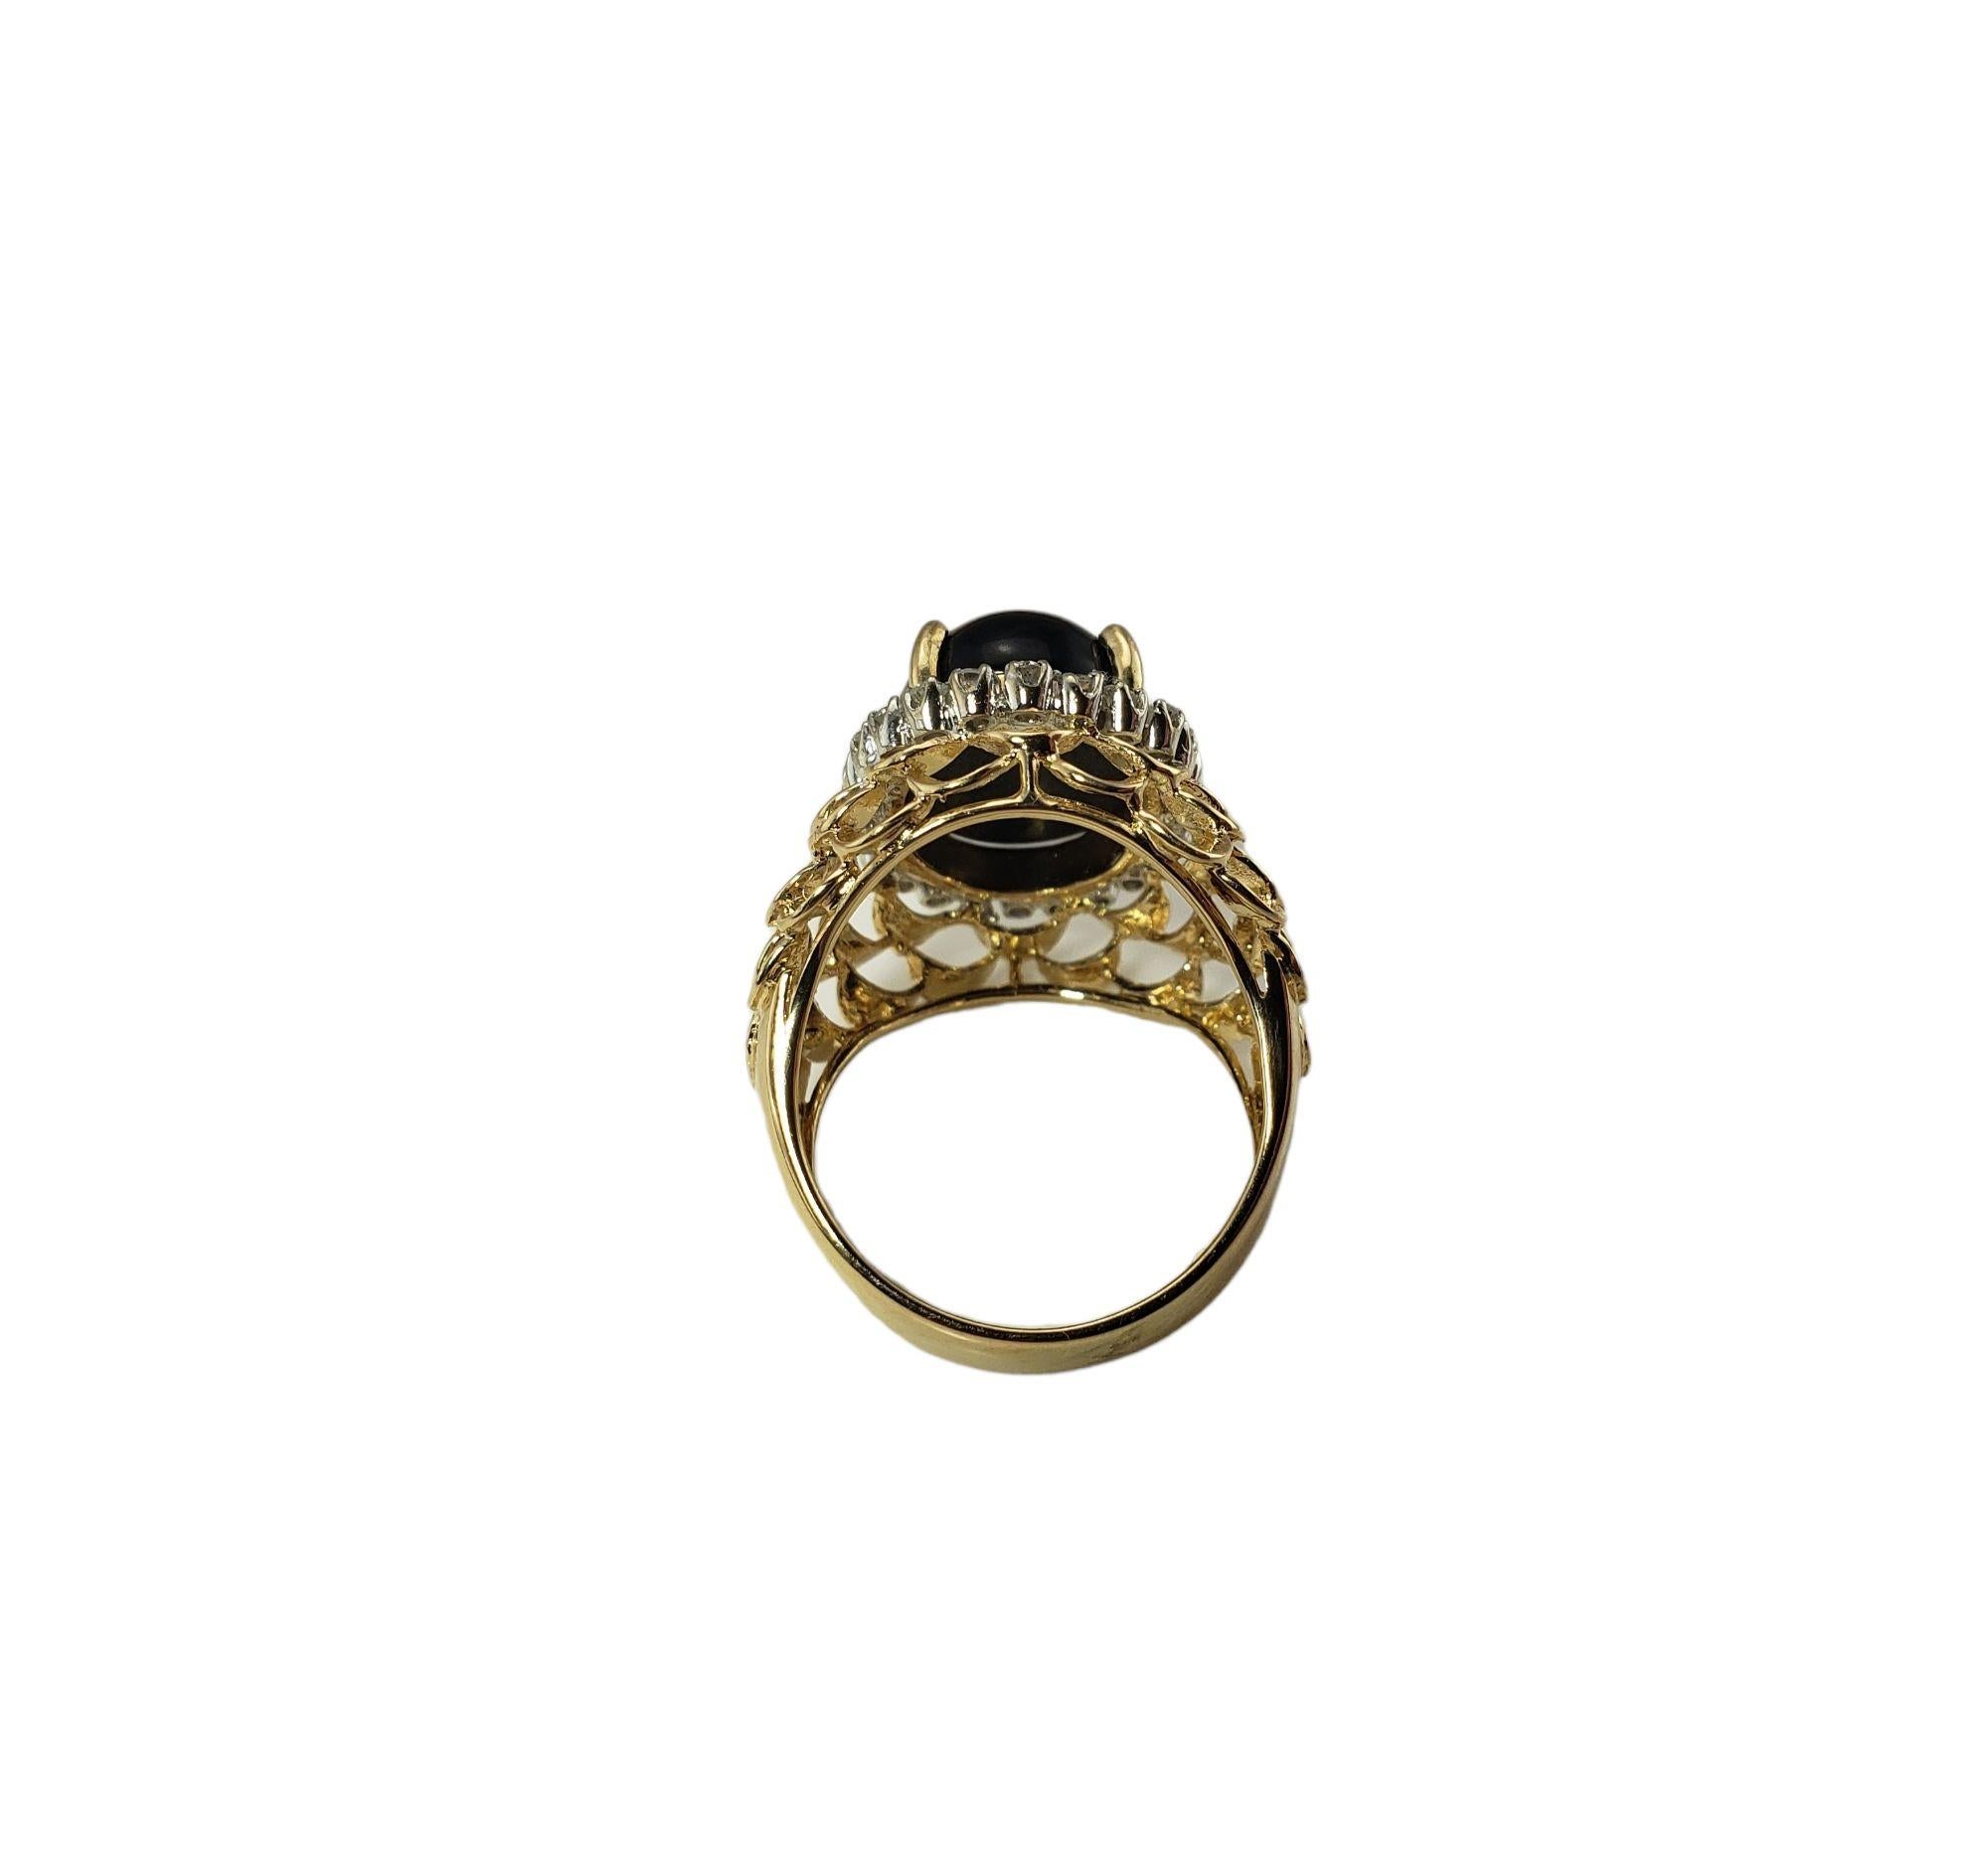 Vintage 14 Karat Yellow Gold Onyx and Diamond Ring Size 7.5-

This lovely ring features one cabochon onyx stone (15 mm x 11 mm) and 24 round brilliant cut diamonds set in beautifully detailed 14K yellow gold. Width: 20 mm. Height: 14 mm. Shank: 5